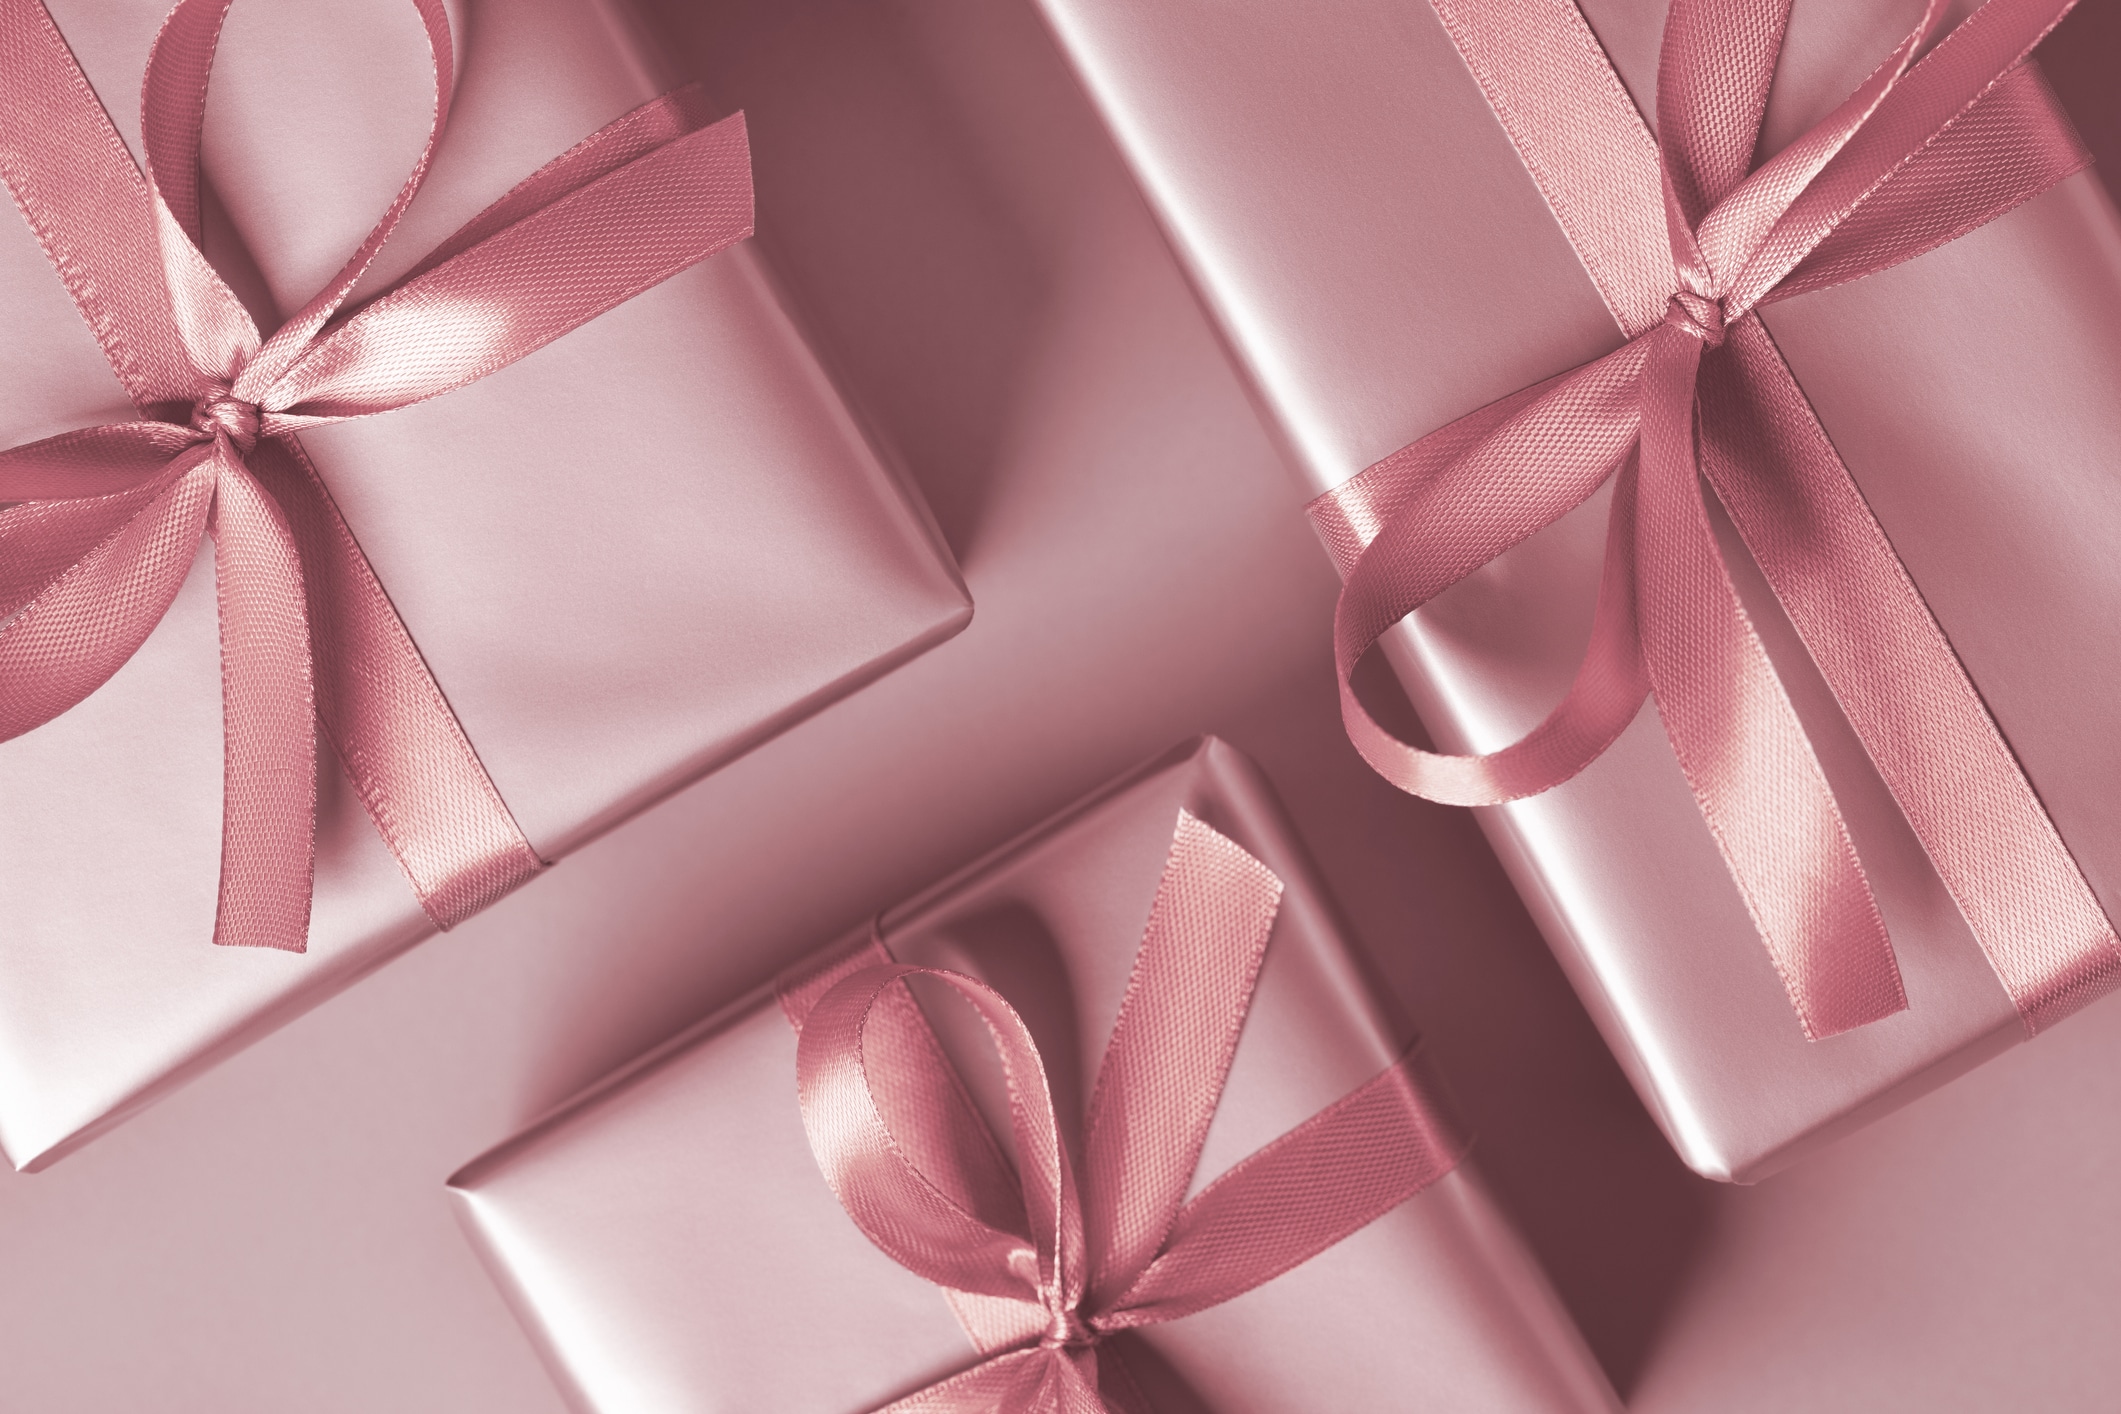 JD’s Data Reveals Gift Consumption Trends